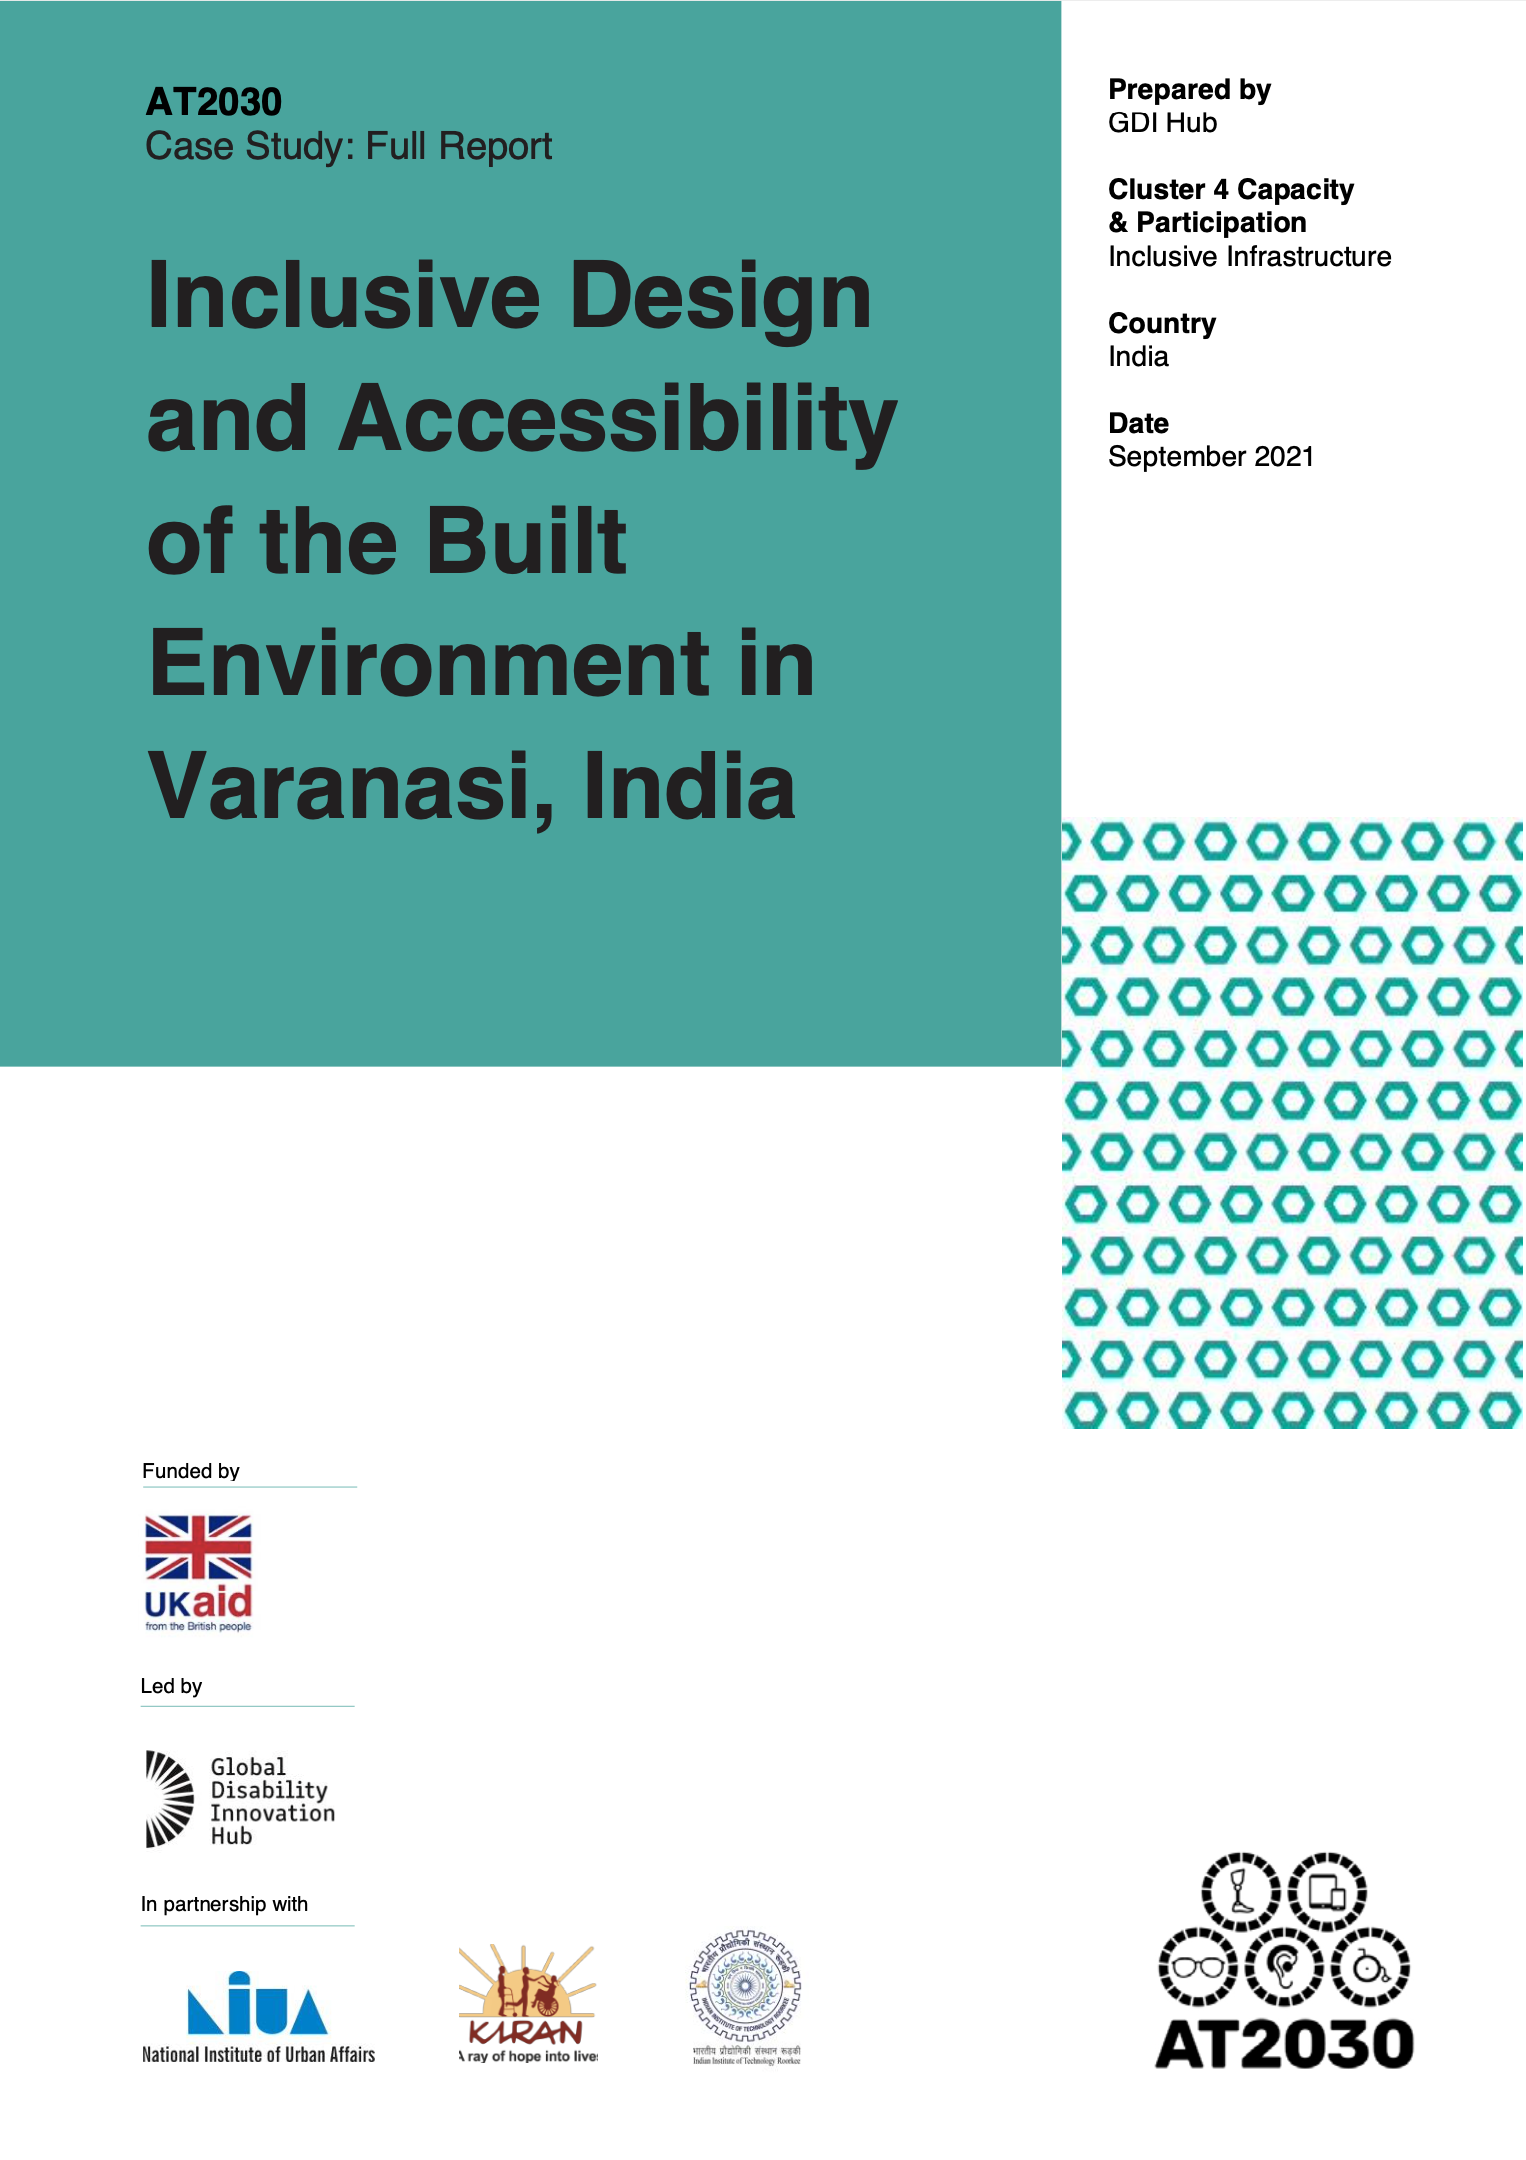 Cover page of the case study entitled: Inclusive Design and Accessibility of the Built Environment in Varanasi, India Cover Image